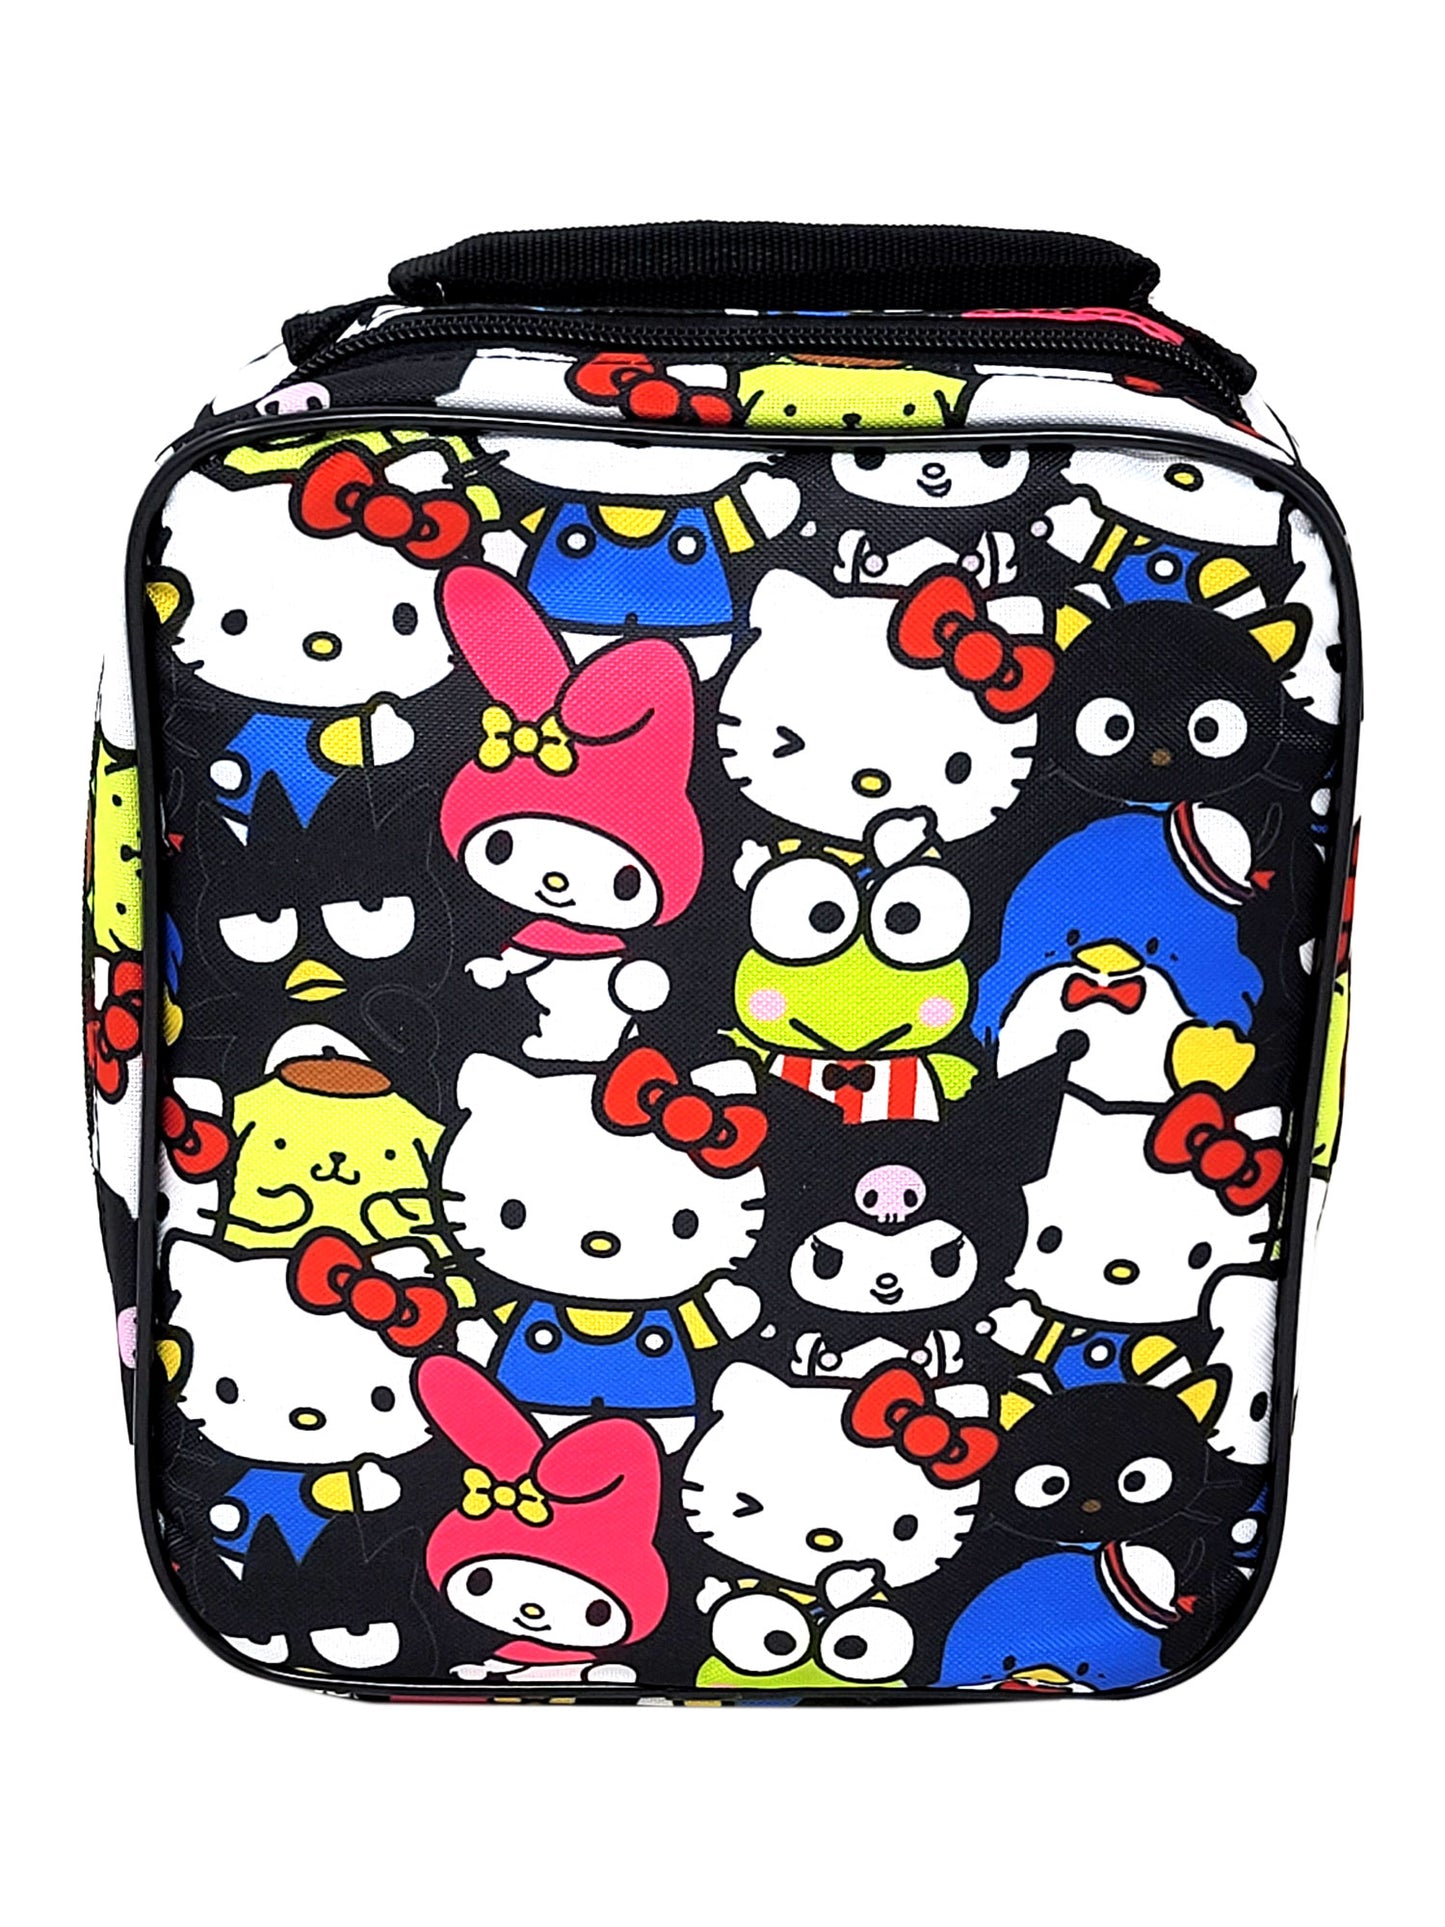 Hello Kitty Insulated Lunch Bag Black Sanrio w/ 2-Piece Food Container Set